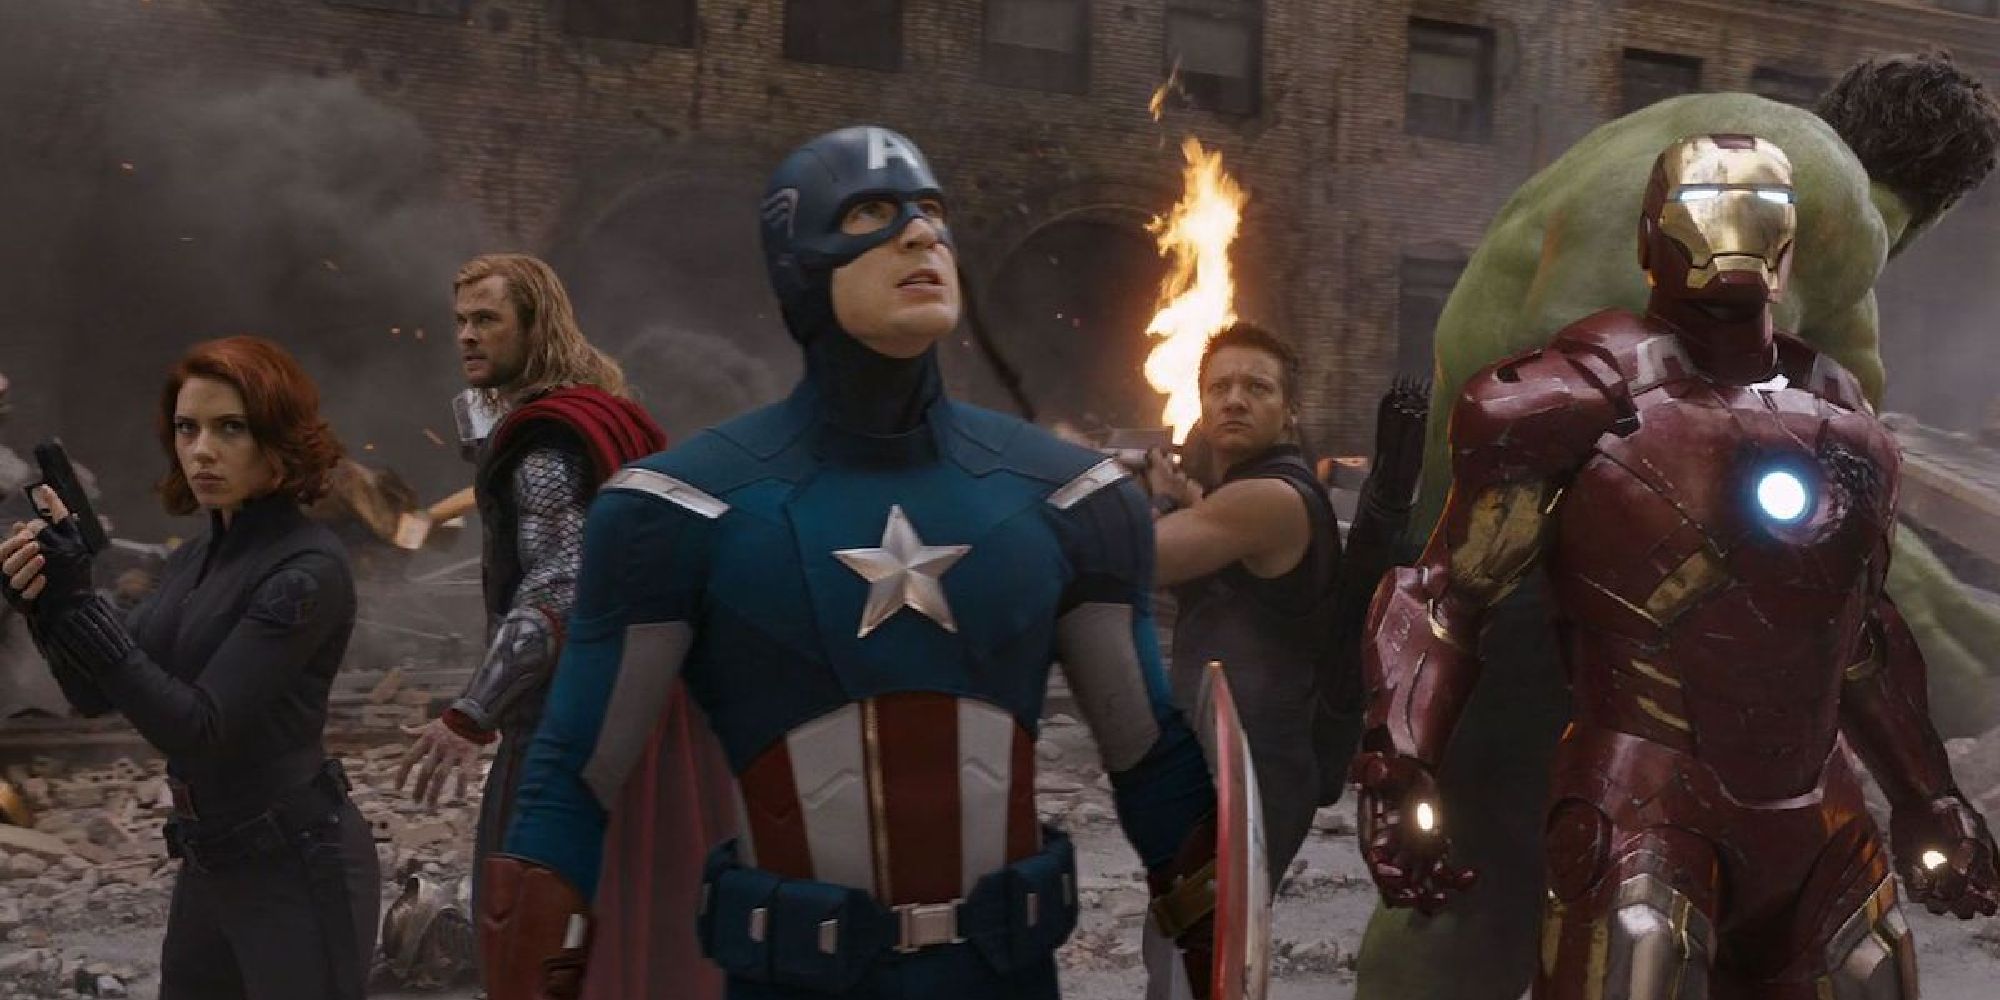 Black Widow, Thor, Captain America, Hawkeye, Iron Man, and the Hulk in the Battle of New York in 2012's Avengers